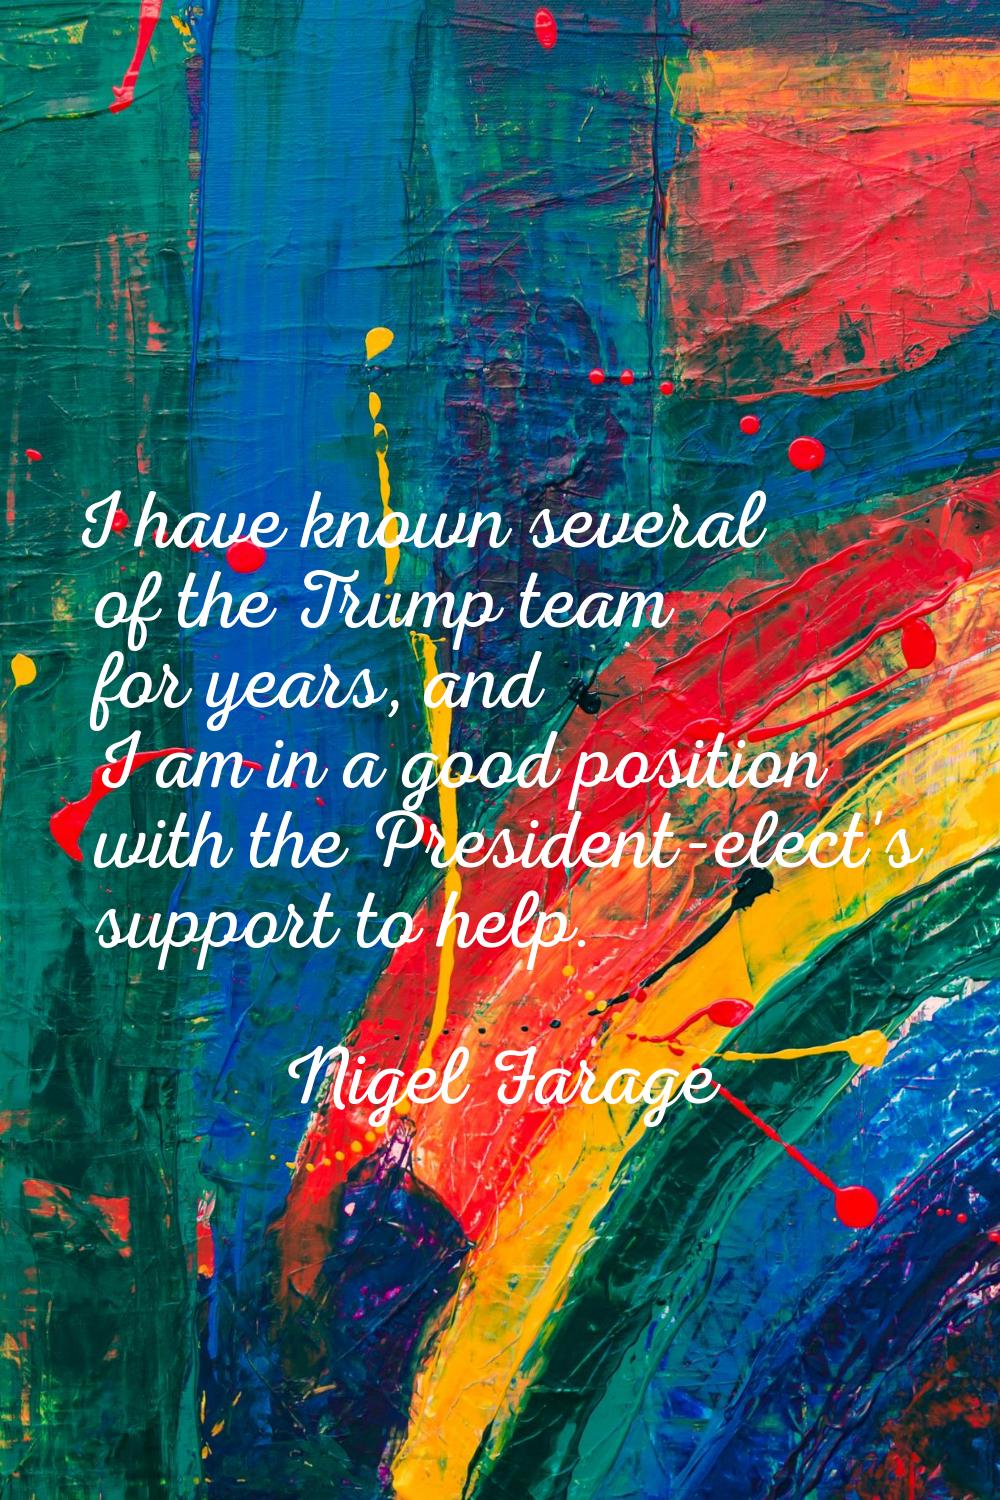 I have known several of the Trump team for years, and I am in a good position with the President-el